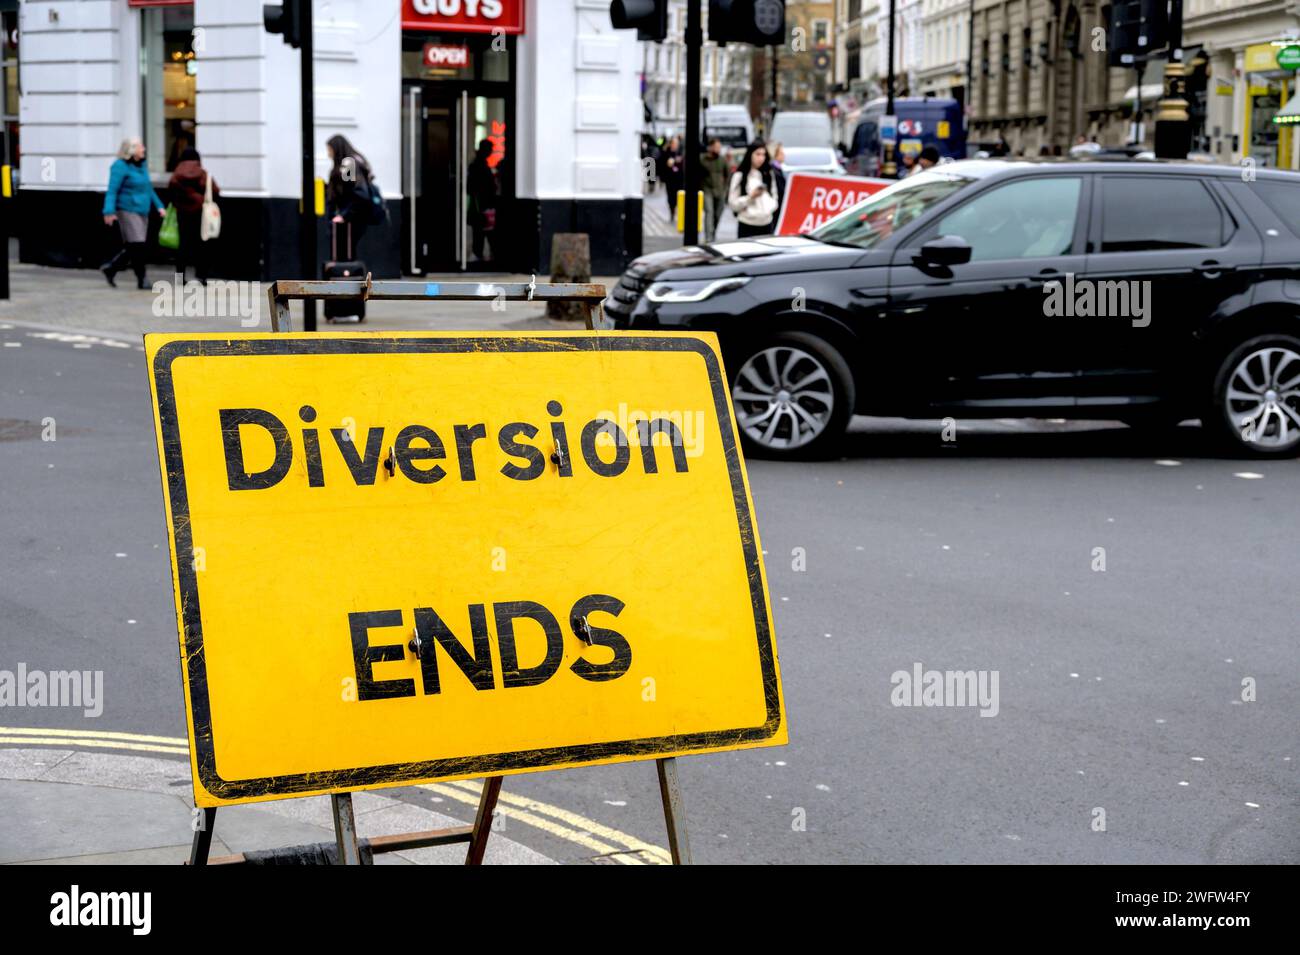 London, UK. 'Diversion End' sign in Covent Garden Stock Photo